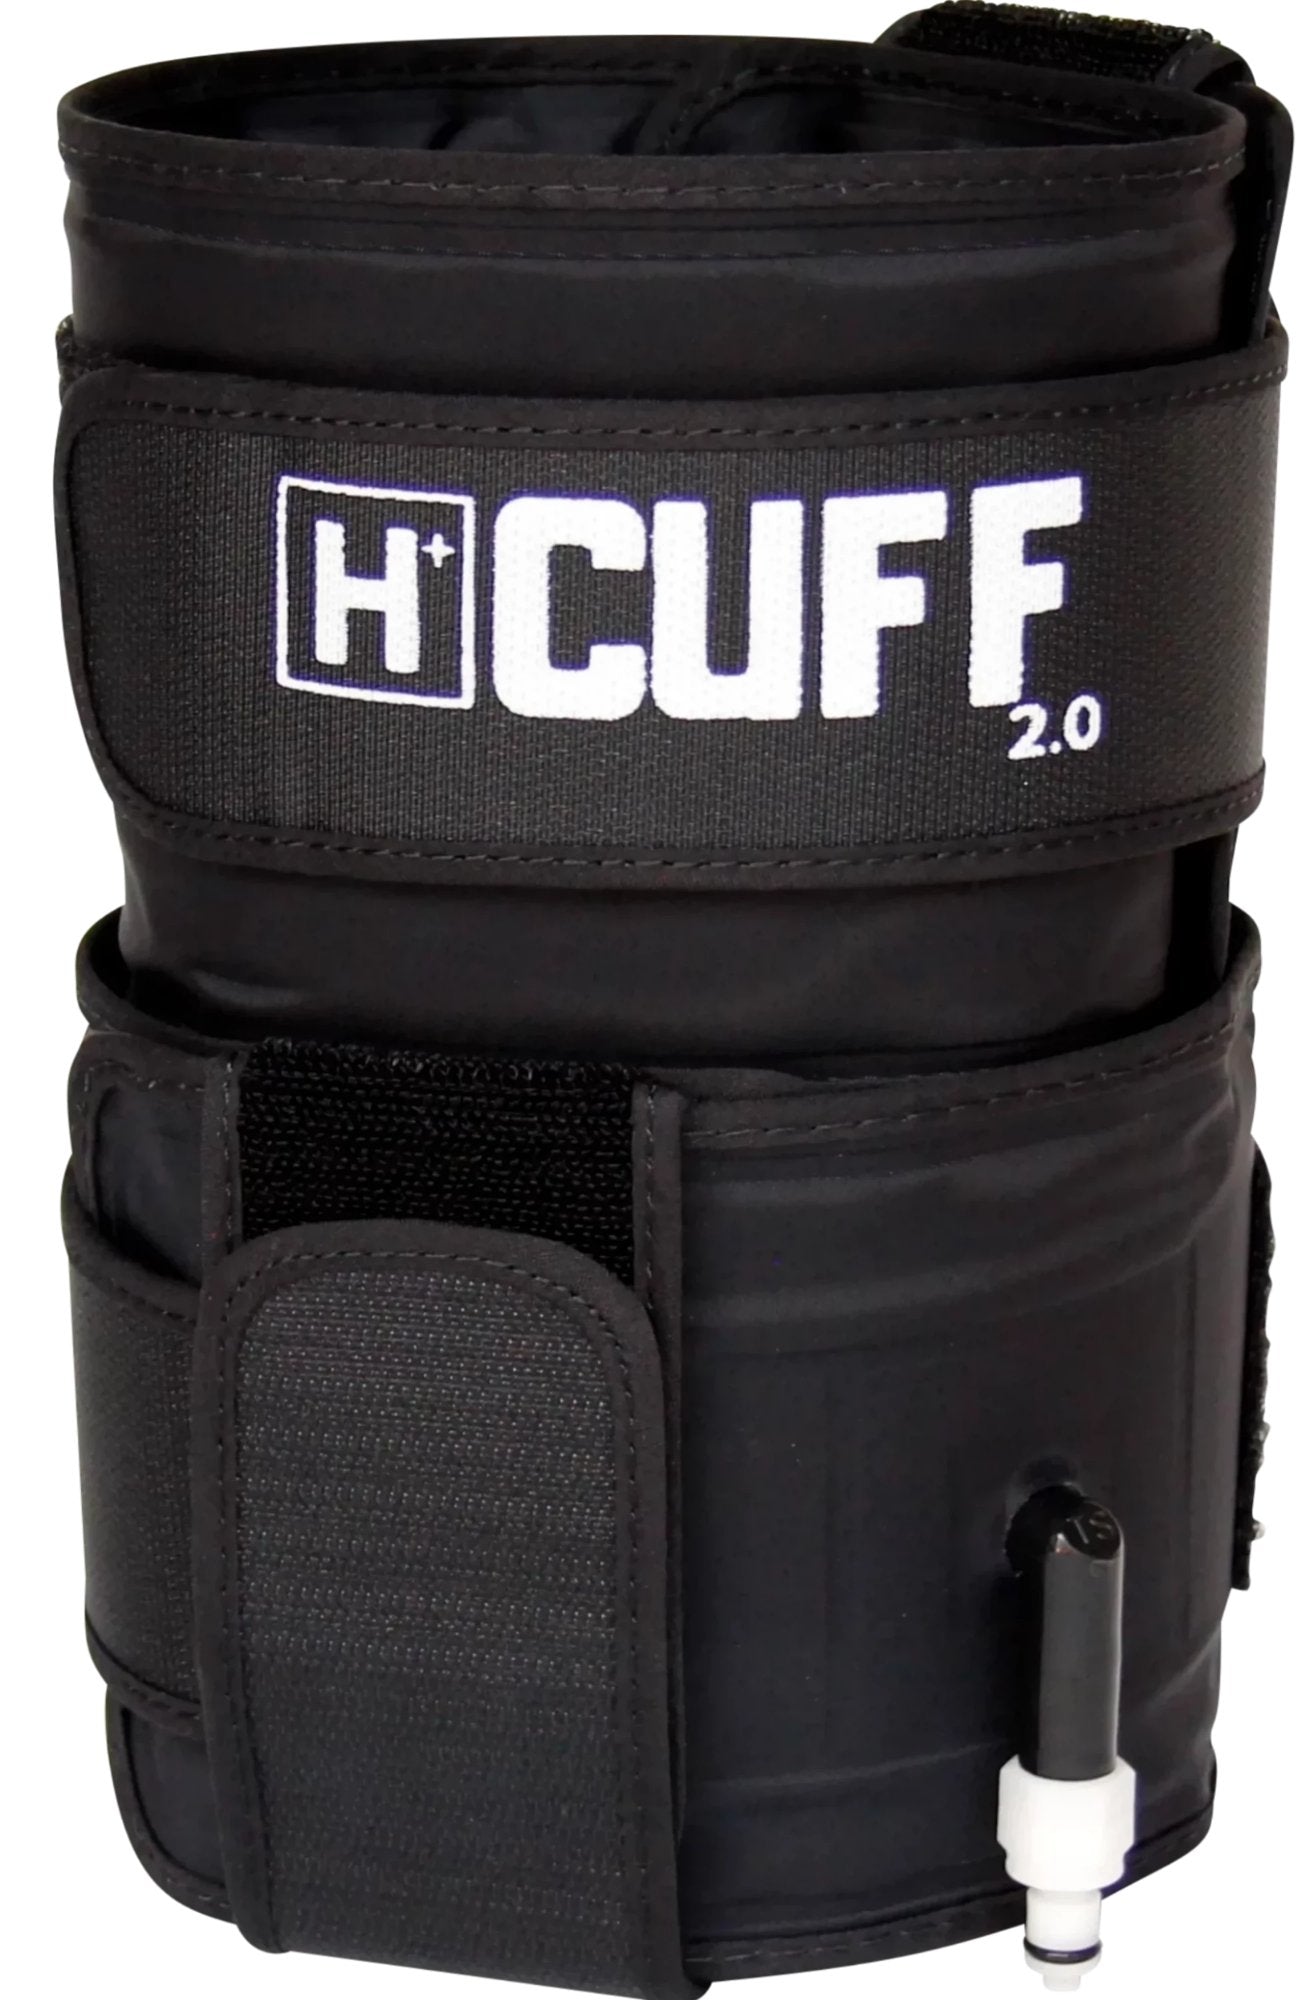 H+ CUFF 2.0 - Large CURVED (Set of 2)